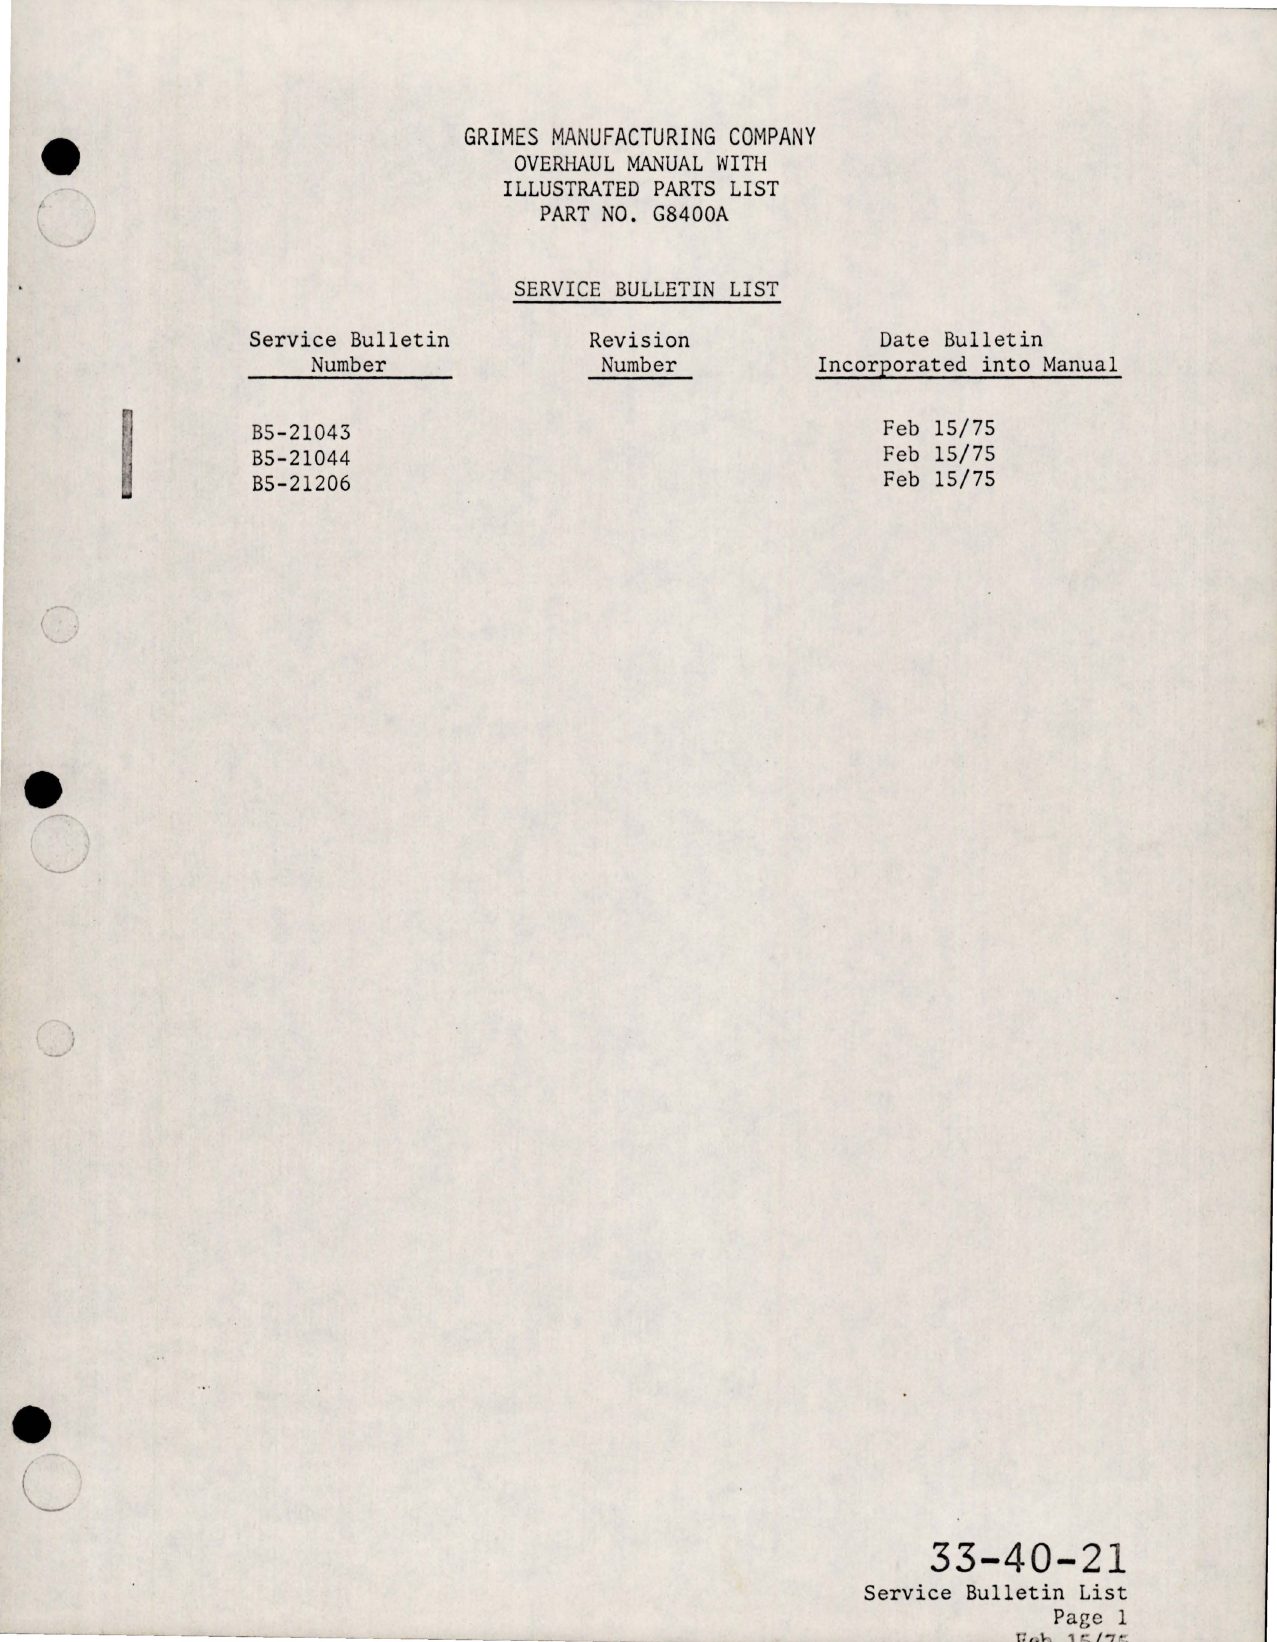 Sample page 5 from AirCorps Library document: Overhaul with Illustrated Parts List for Navigational Rotating Warning Light - G8400A Series